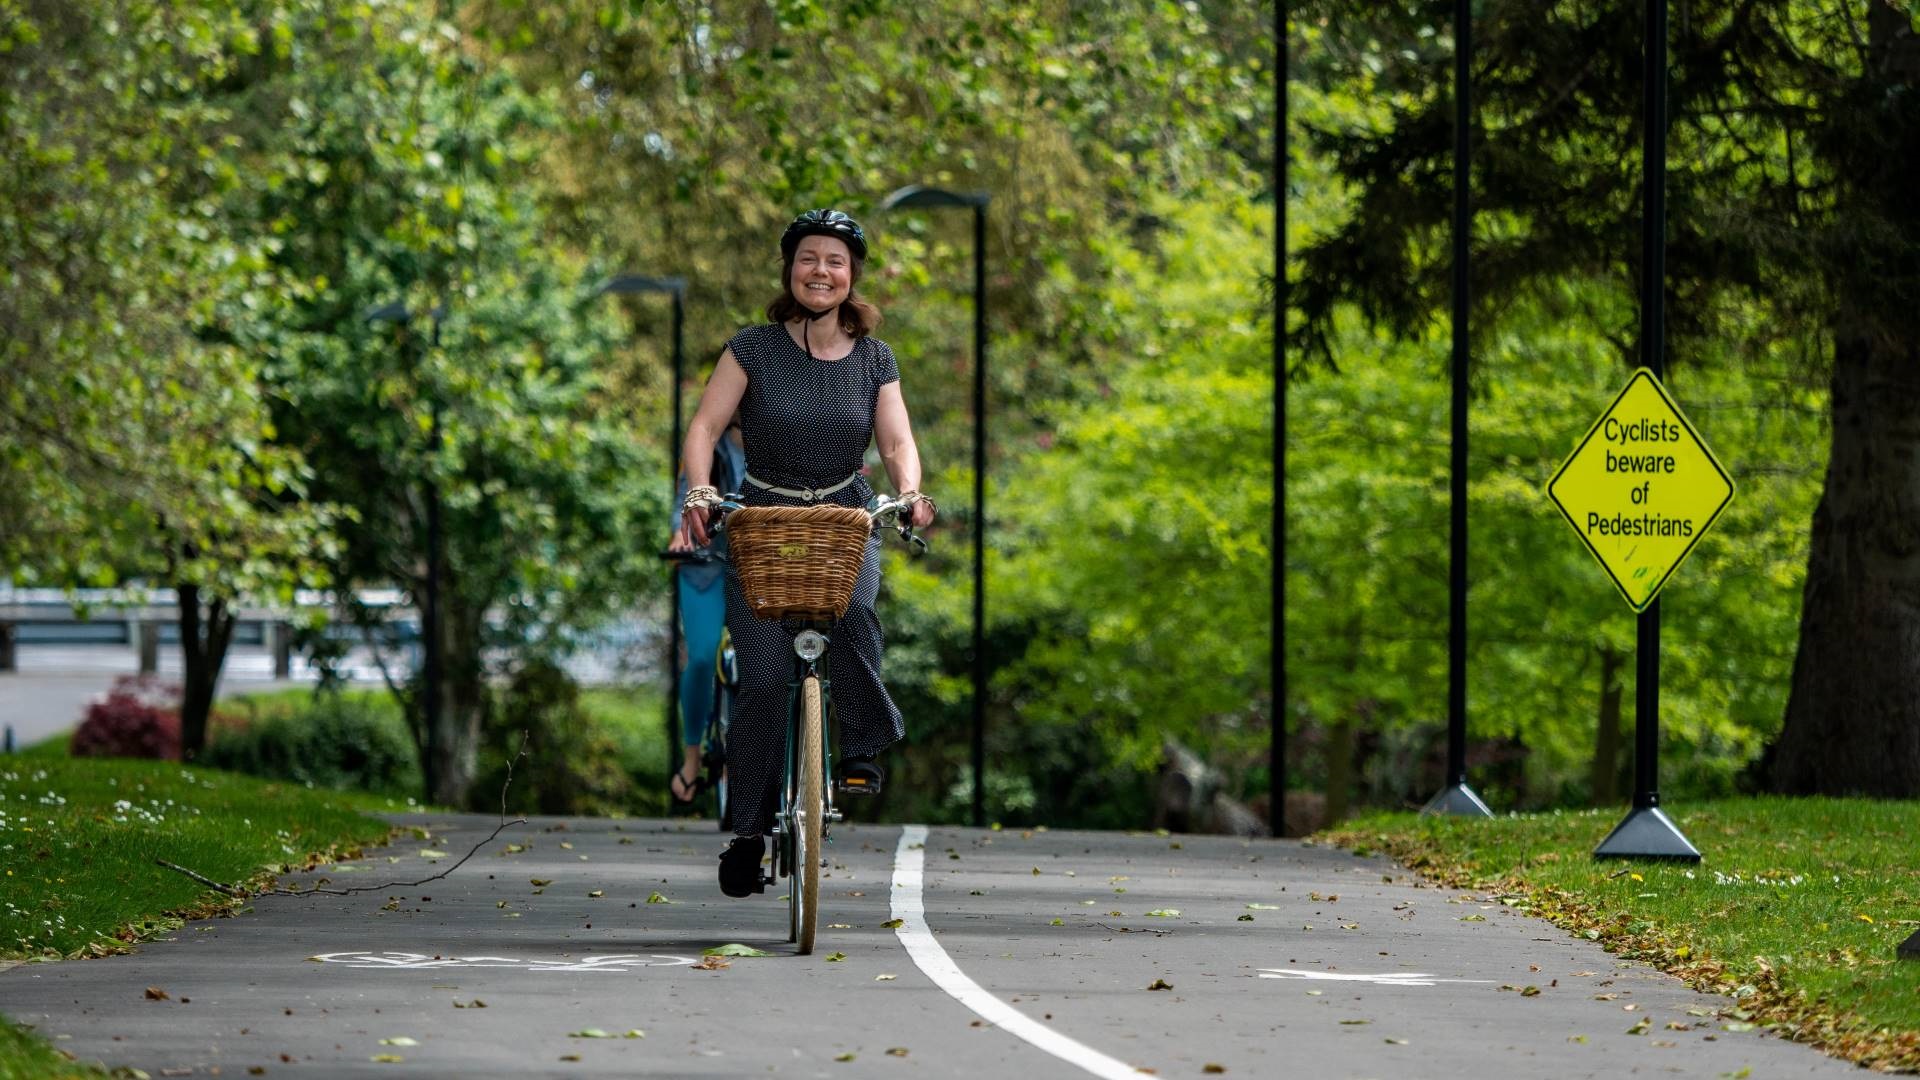 Photo shows woman in everyday clothes riding a commuter bike with a basket along a leafy off-road pathway.